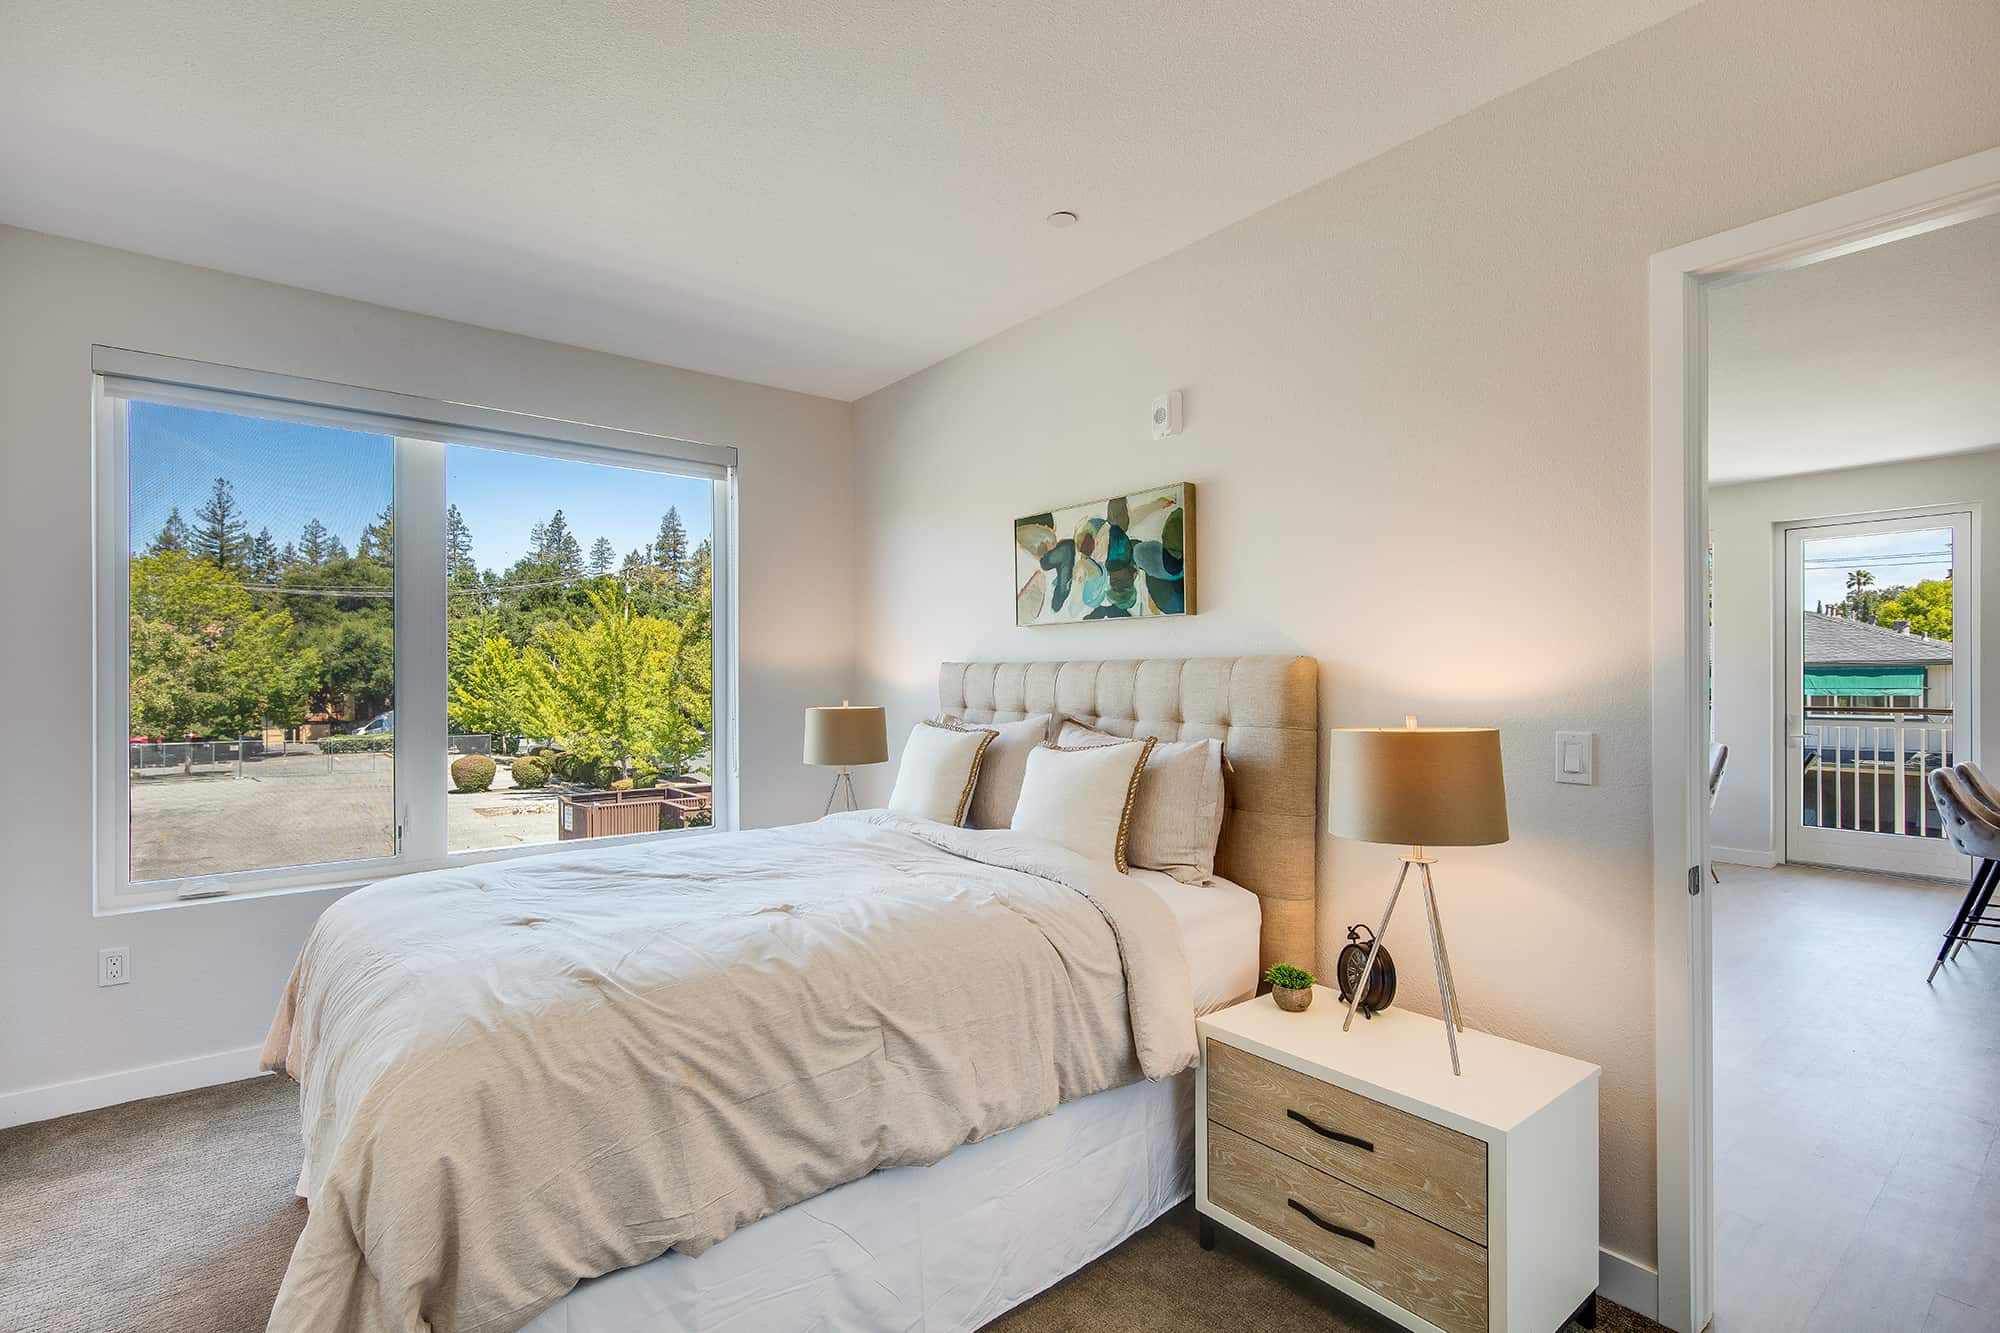 Luxury Apartments Menlo Park CA - Realm - Furnished Bedroom With a Cozy Bed, Carpet Floors, a Set of Windows, and Bedside Tables